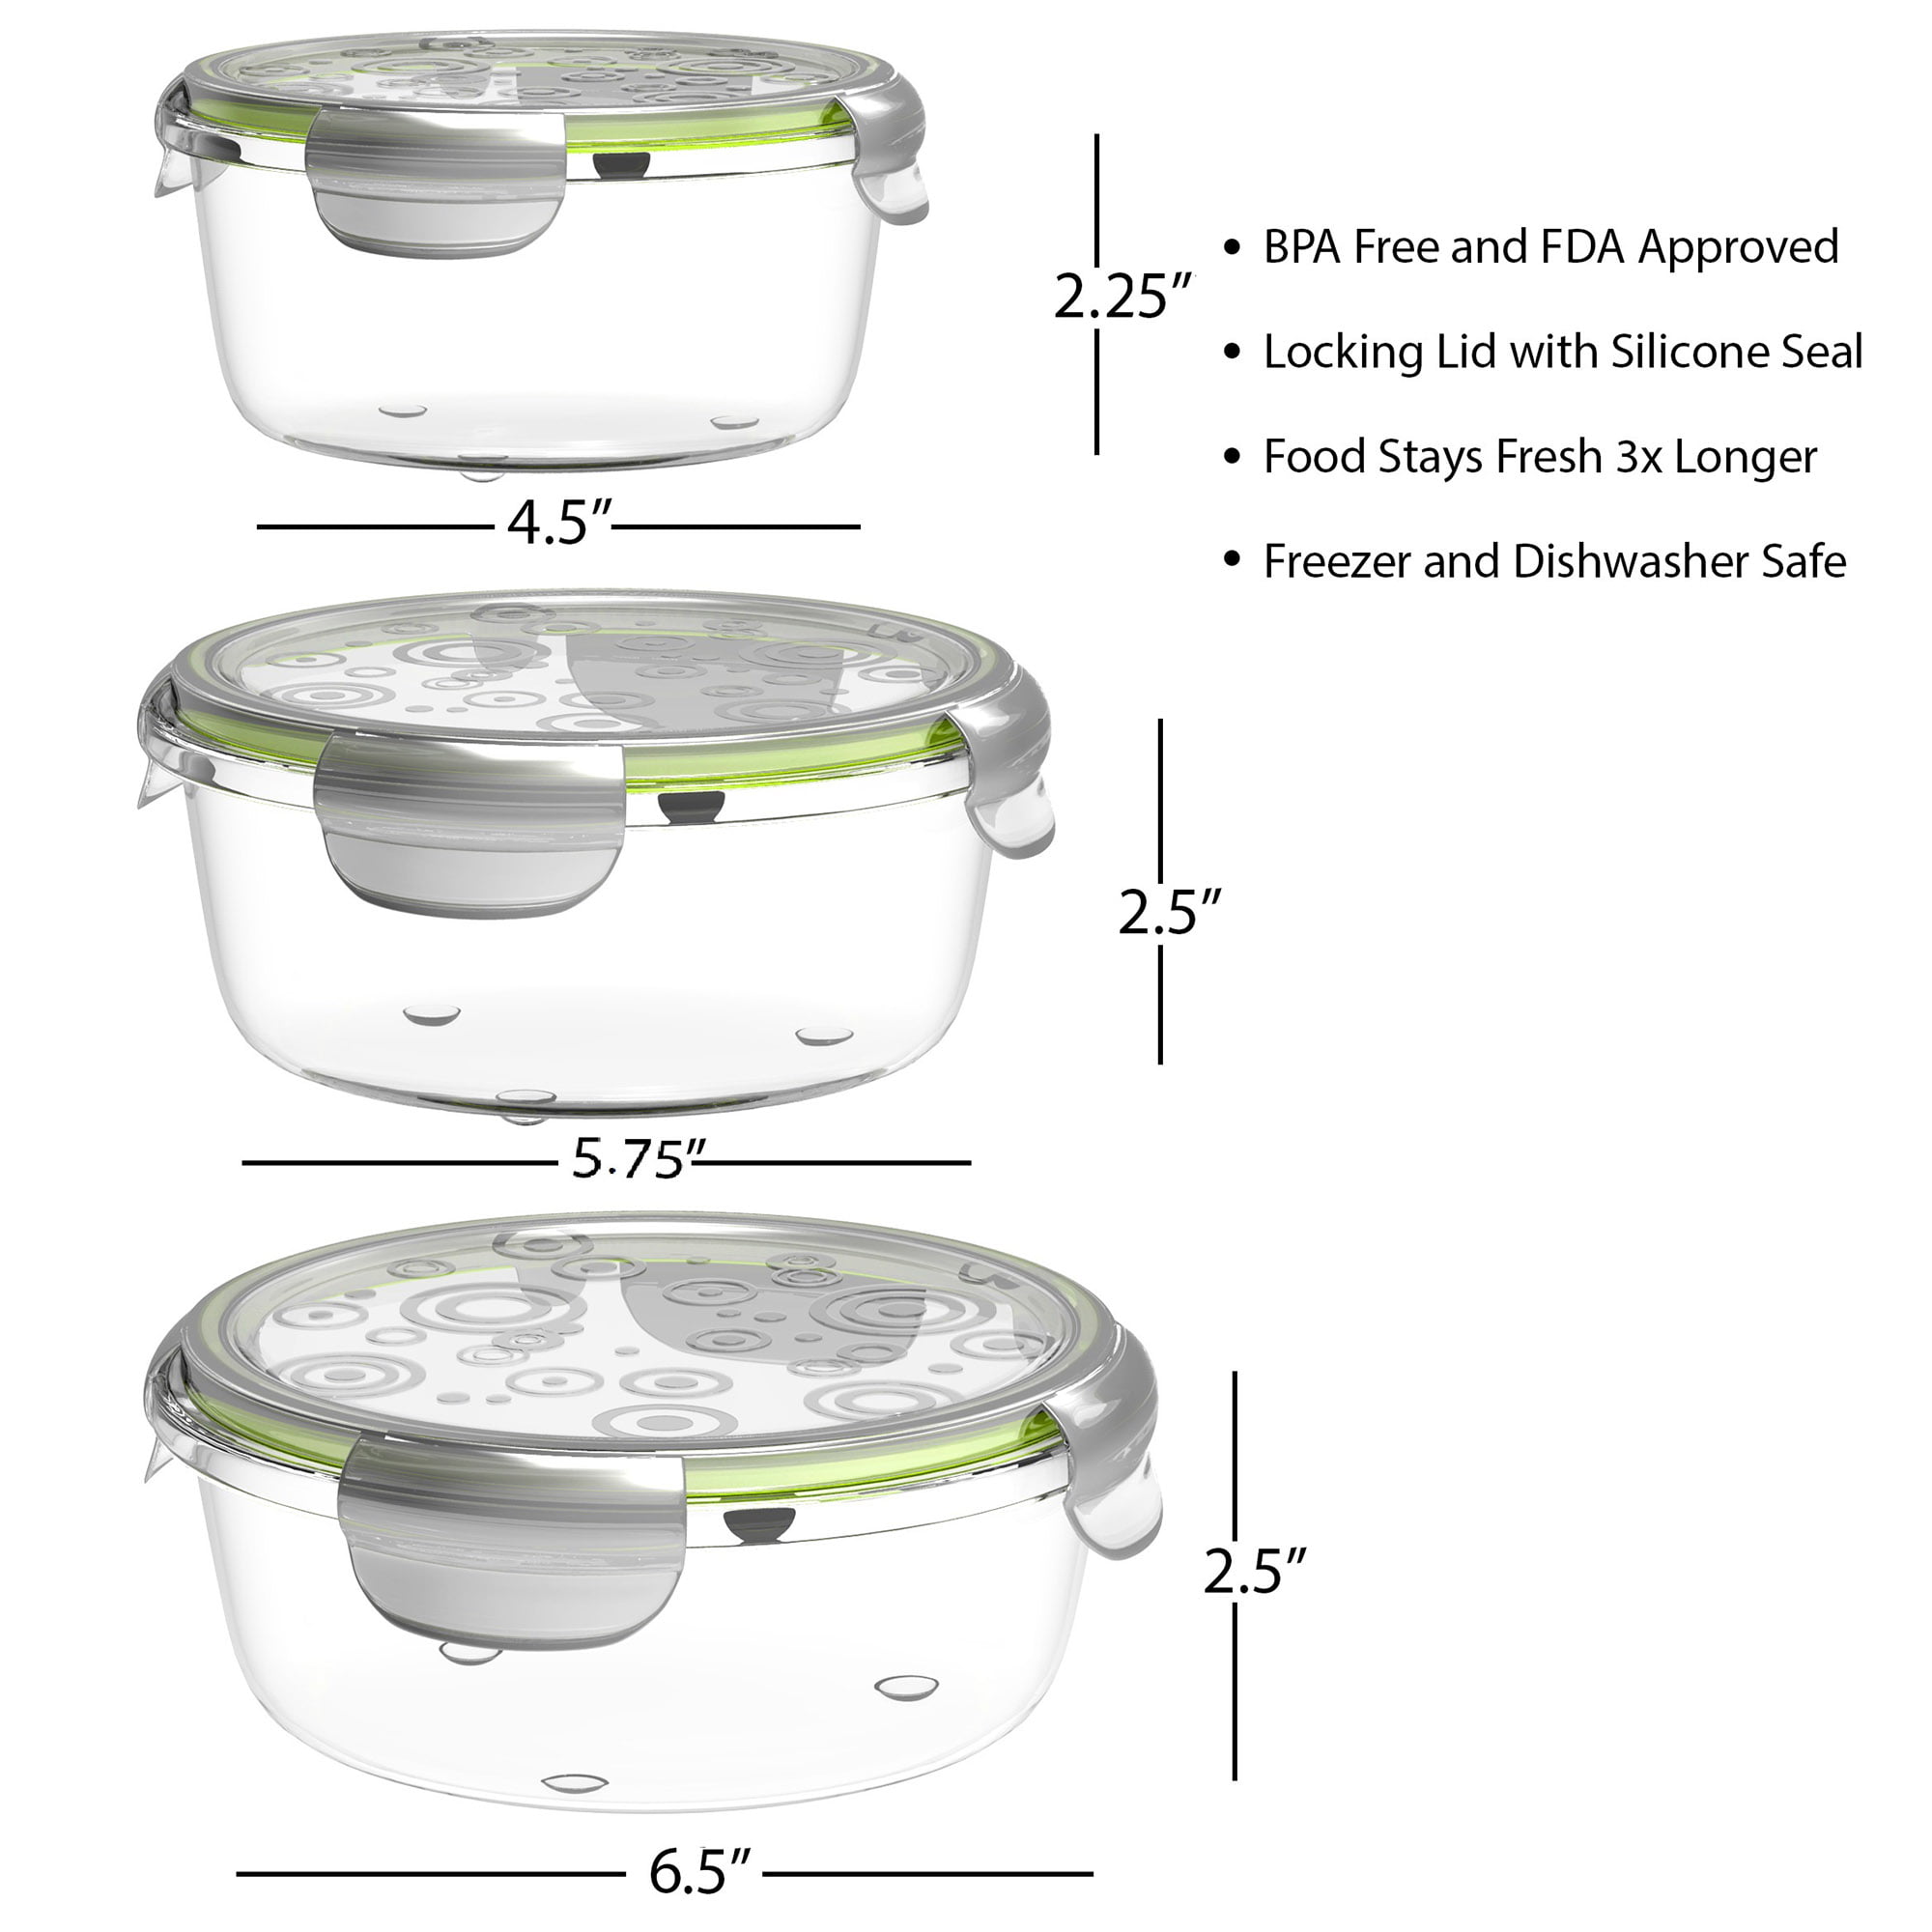 Moss & Stone Kitchen Glass Food Storage Containers Set with Lids 10 PCS. Snapware Transparent Lids Leak Proof, Oven, Freezer, Microwave & Dishwasher